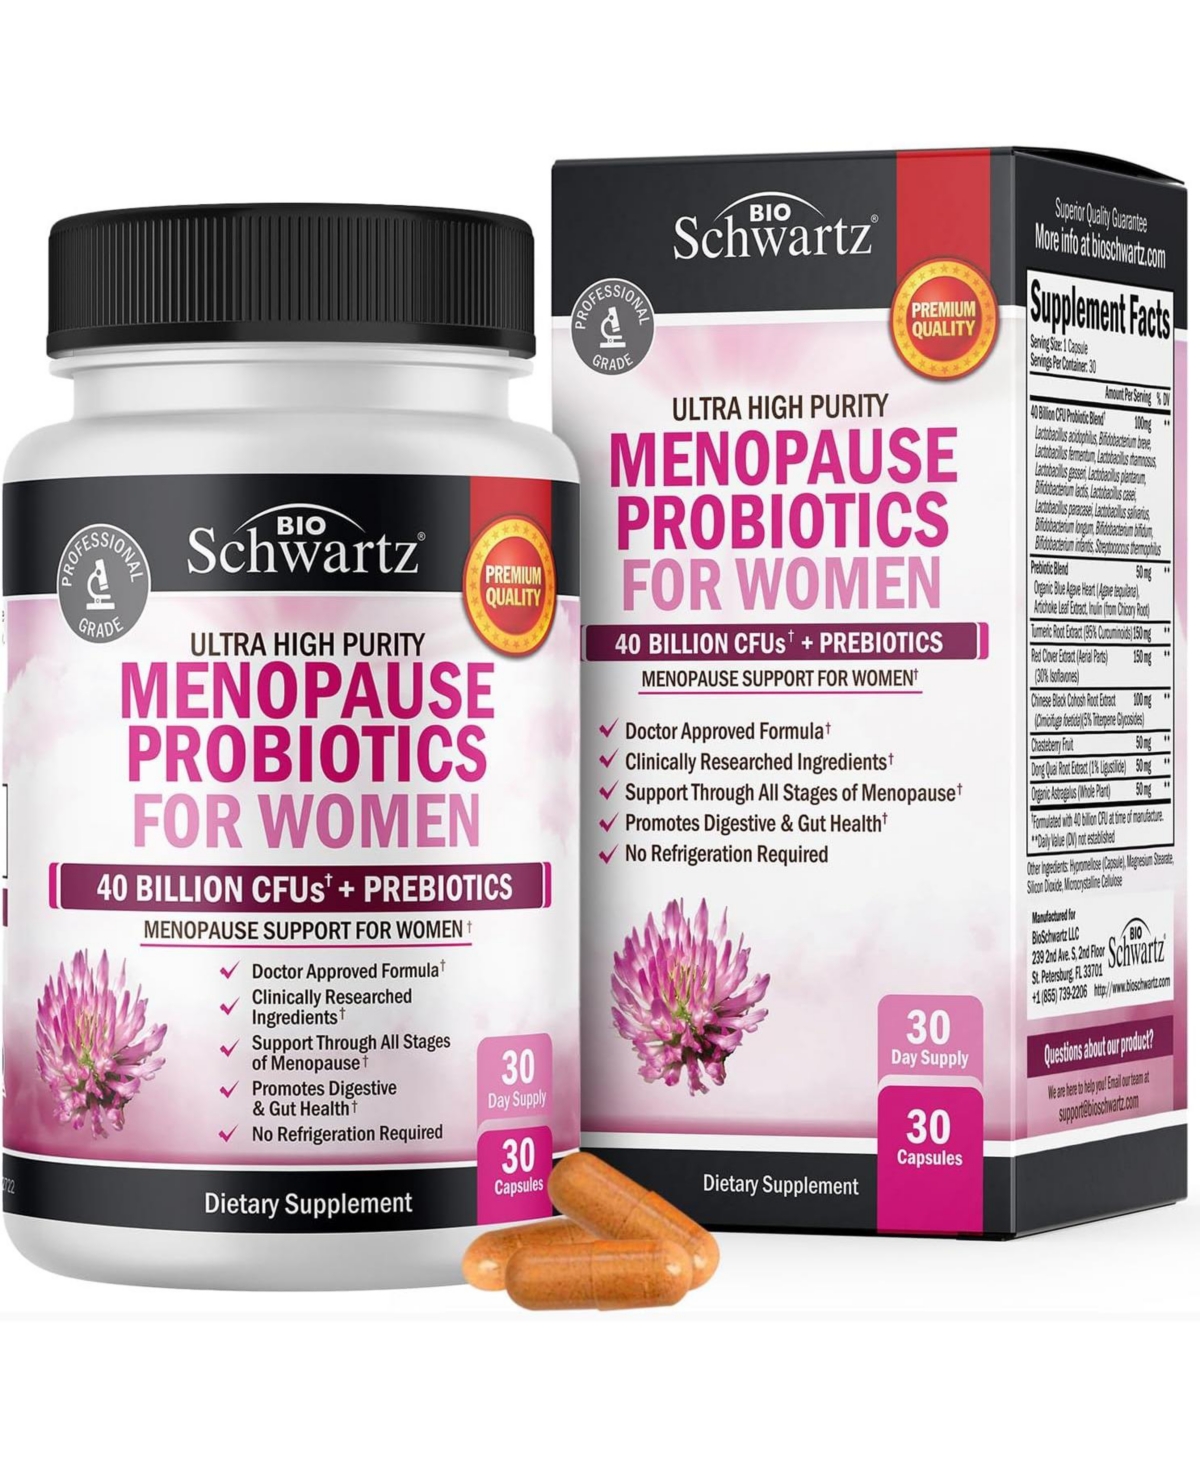 Menopause Support Probiotics - Hot Flashes, Night Sweats, Mood Swings - Menopause Supplements, 30 count